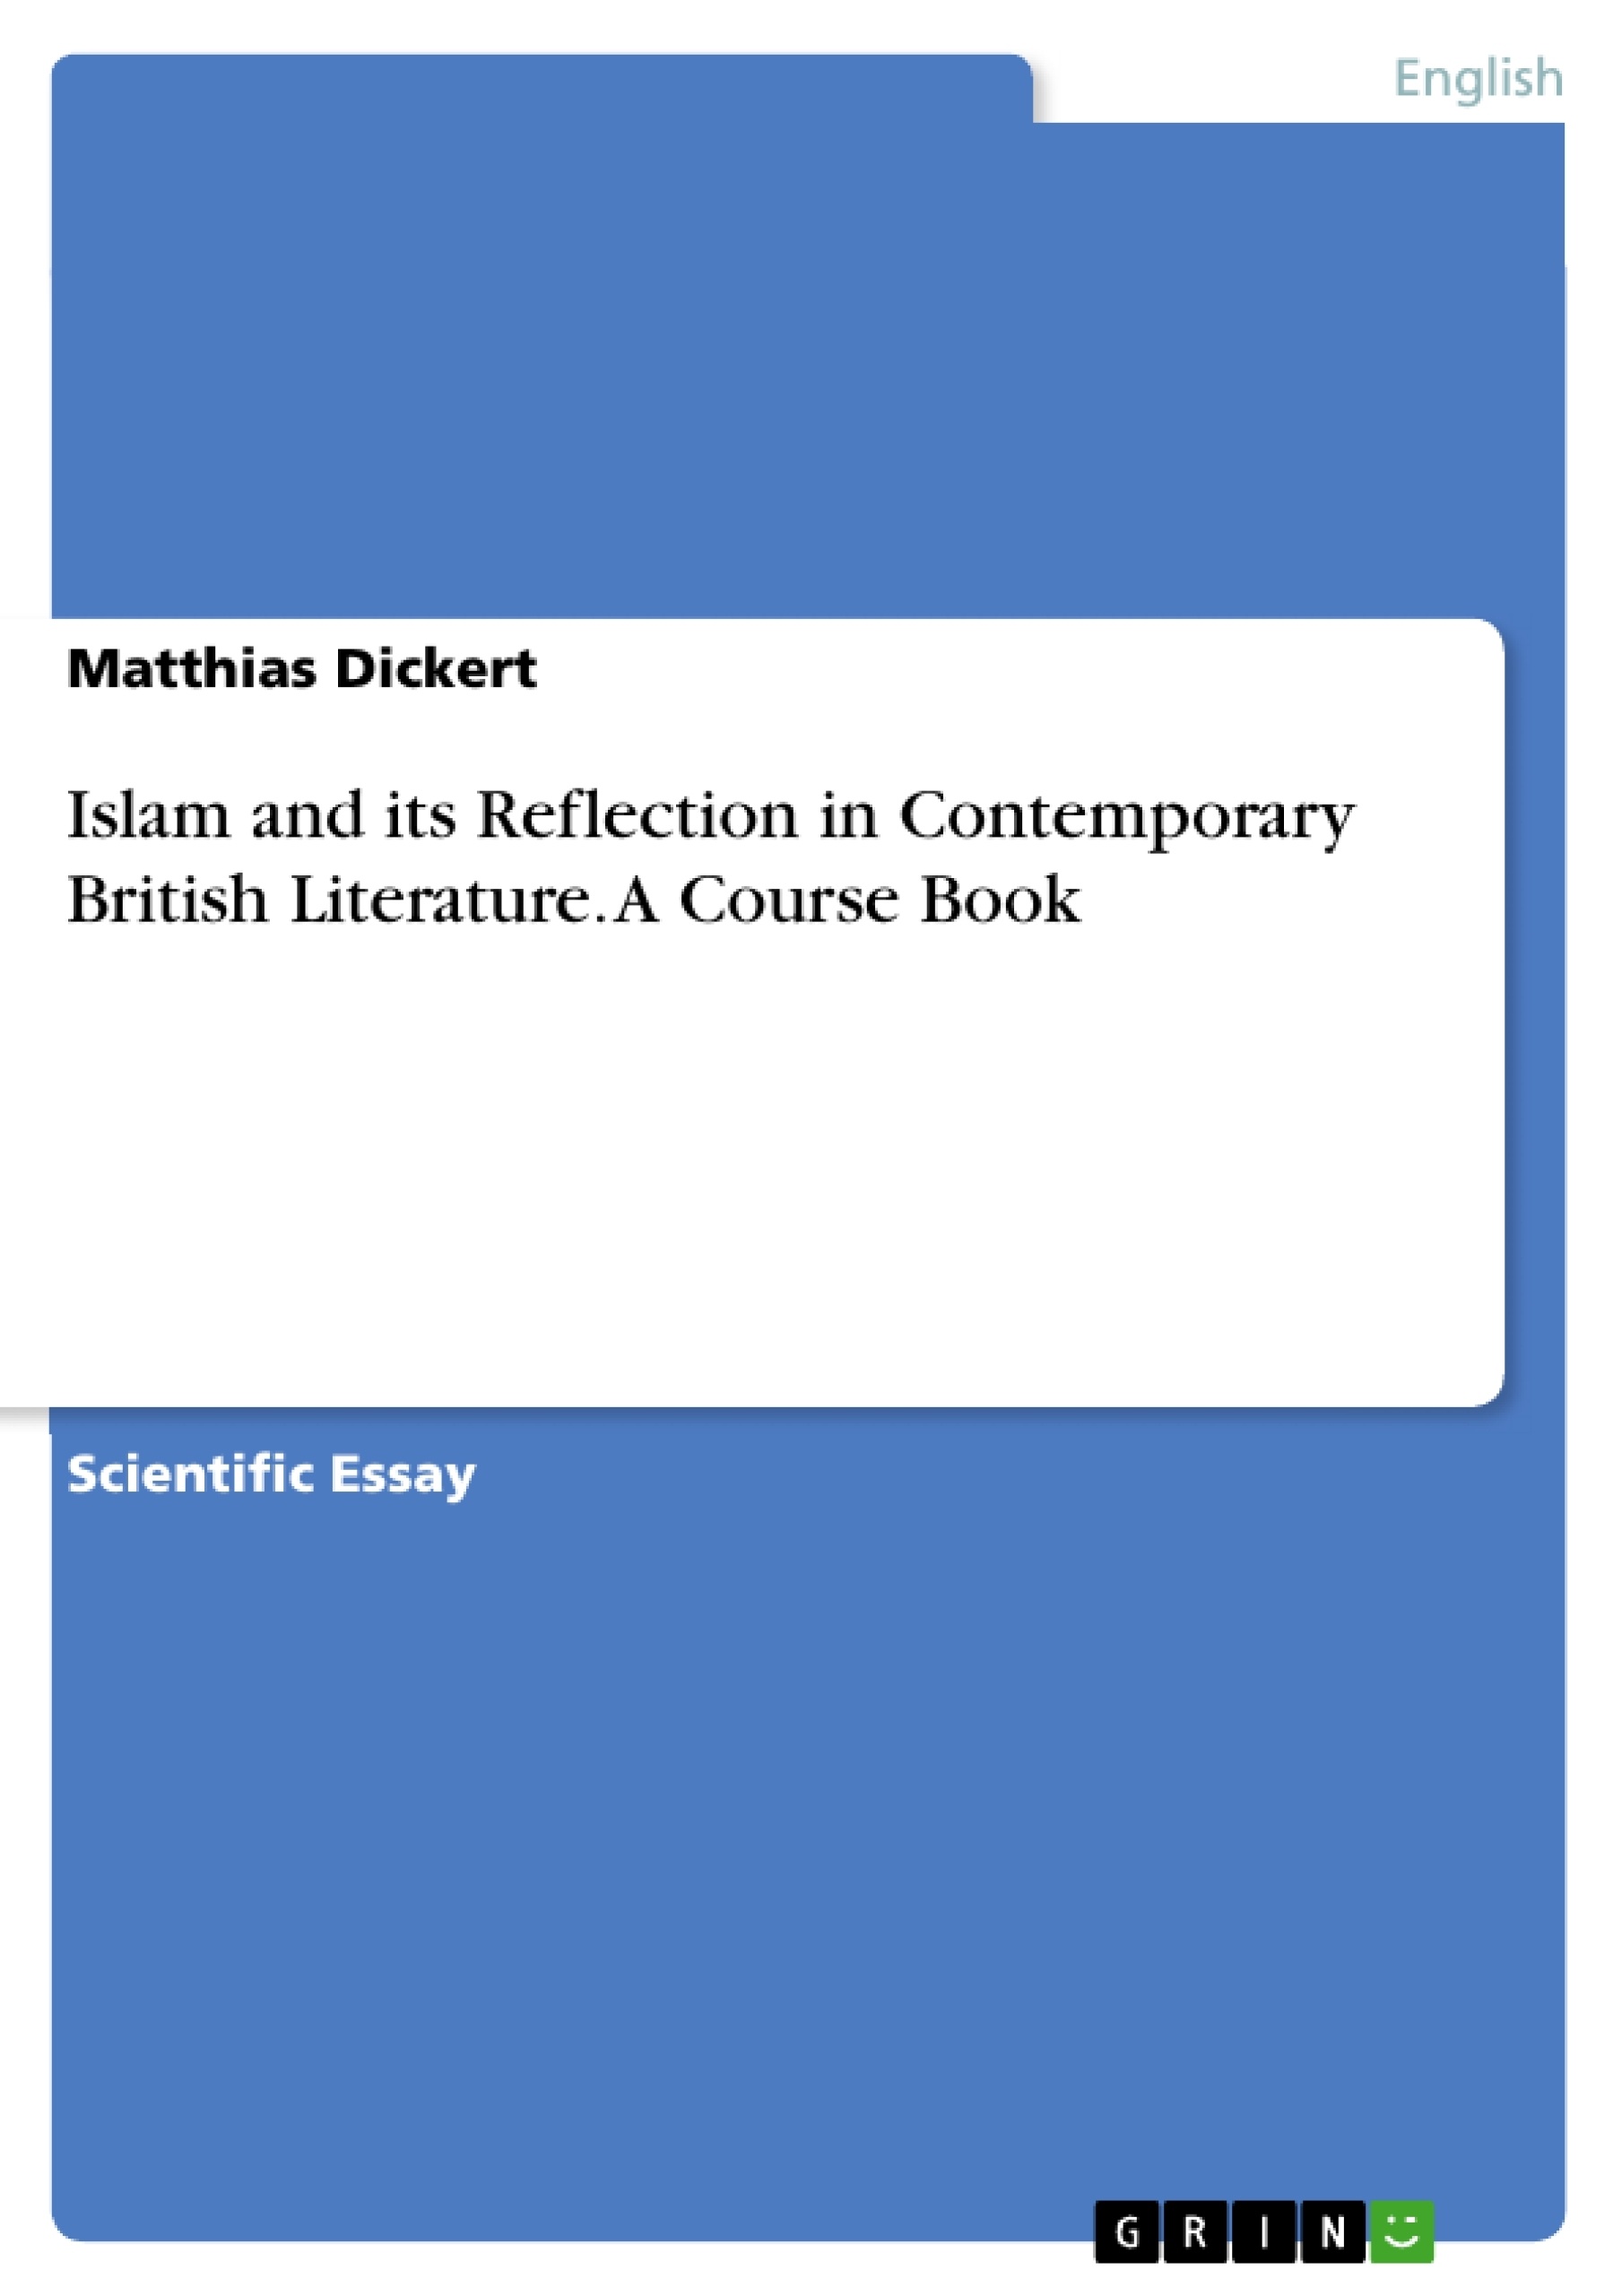 Title: Islam and its Reflection in Contemporary British Literature. A Course Book